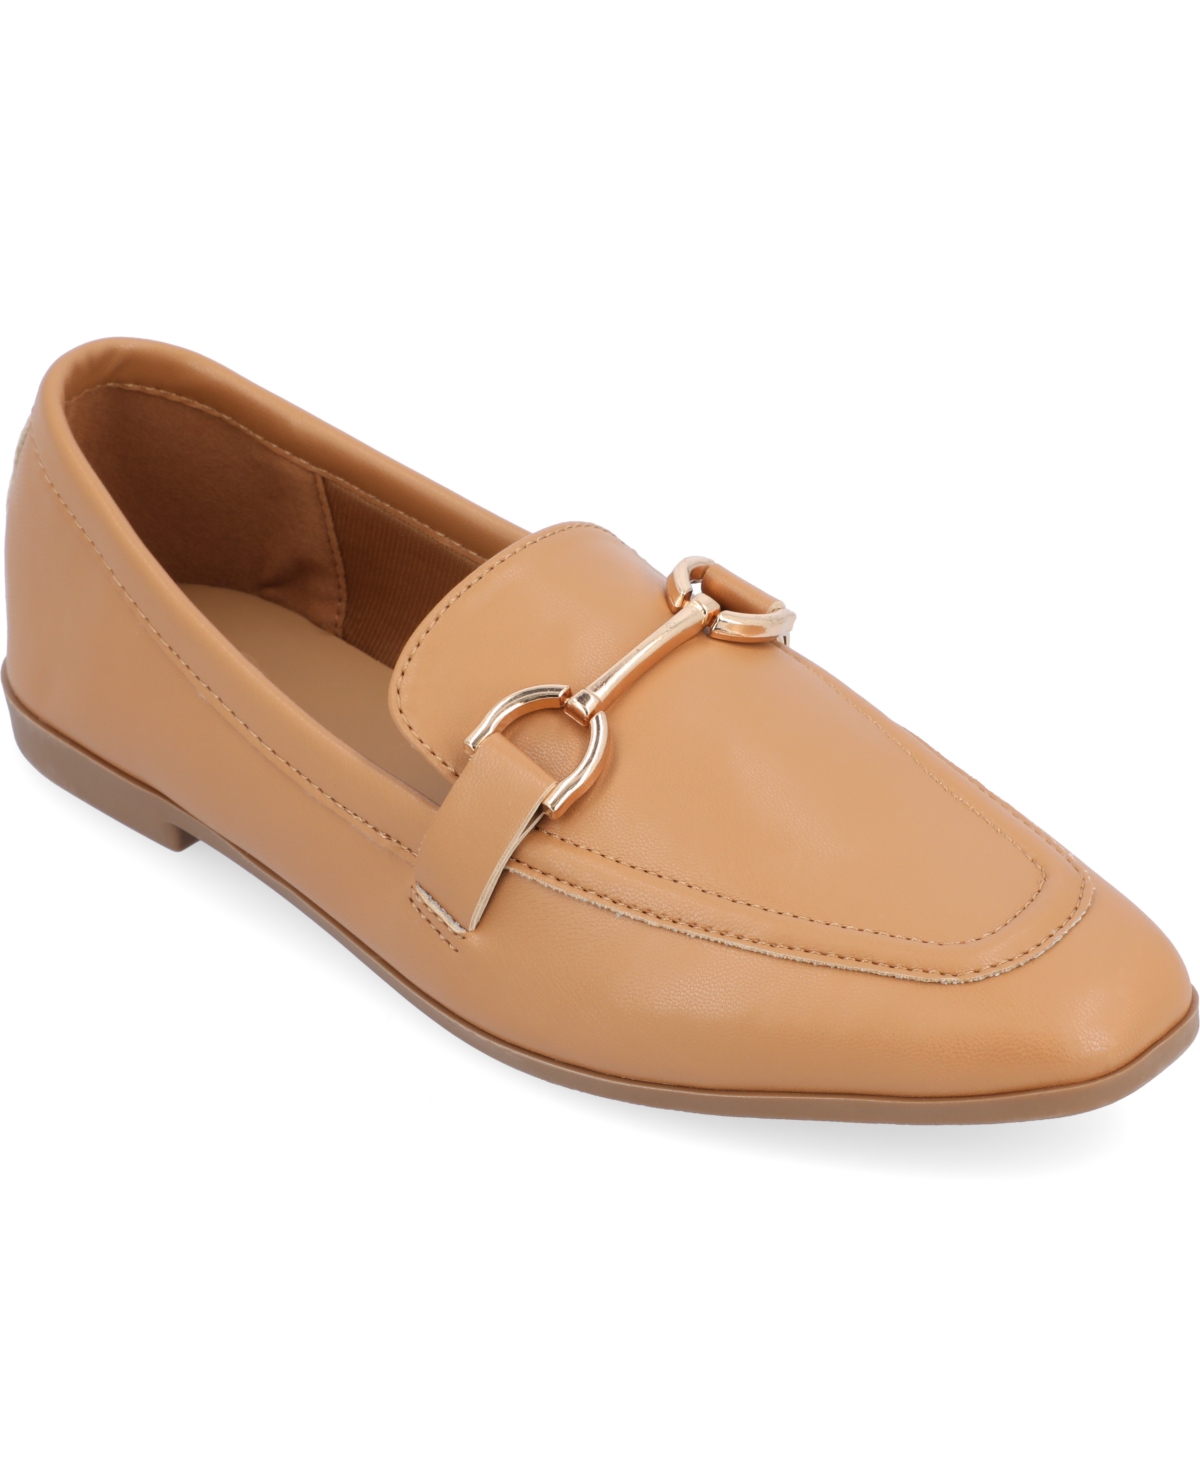 Journee Collection Mizza Bit Loafer In Tan